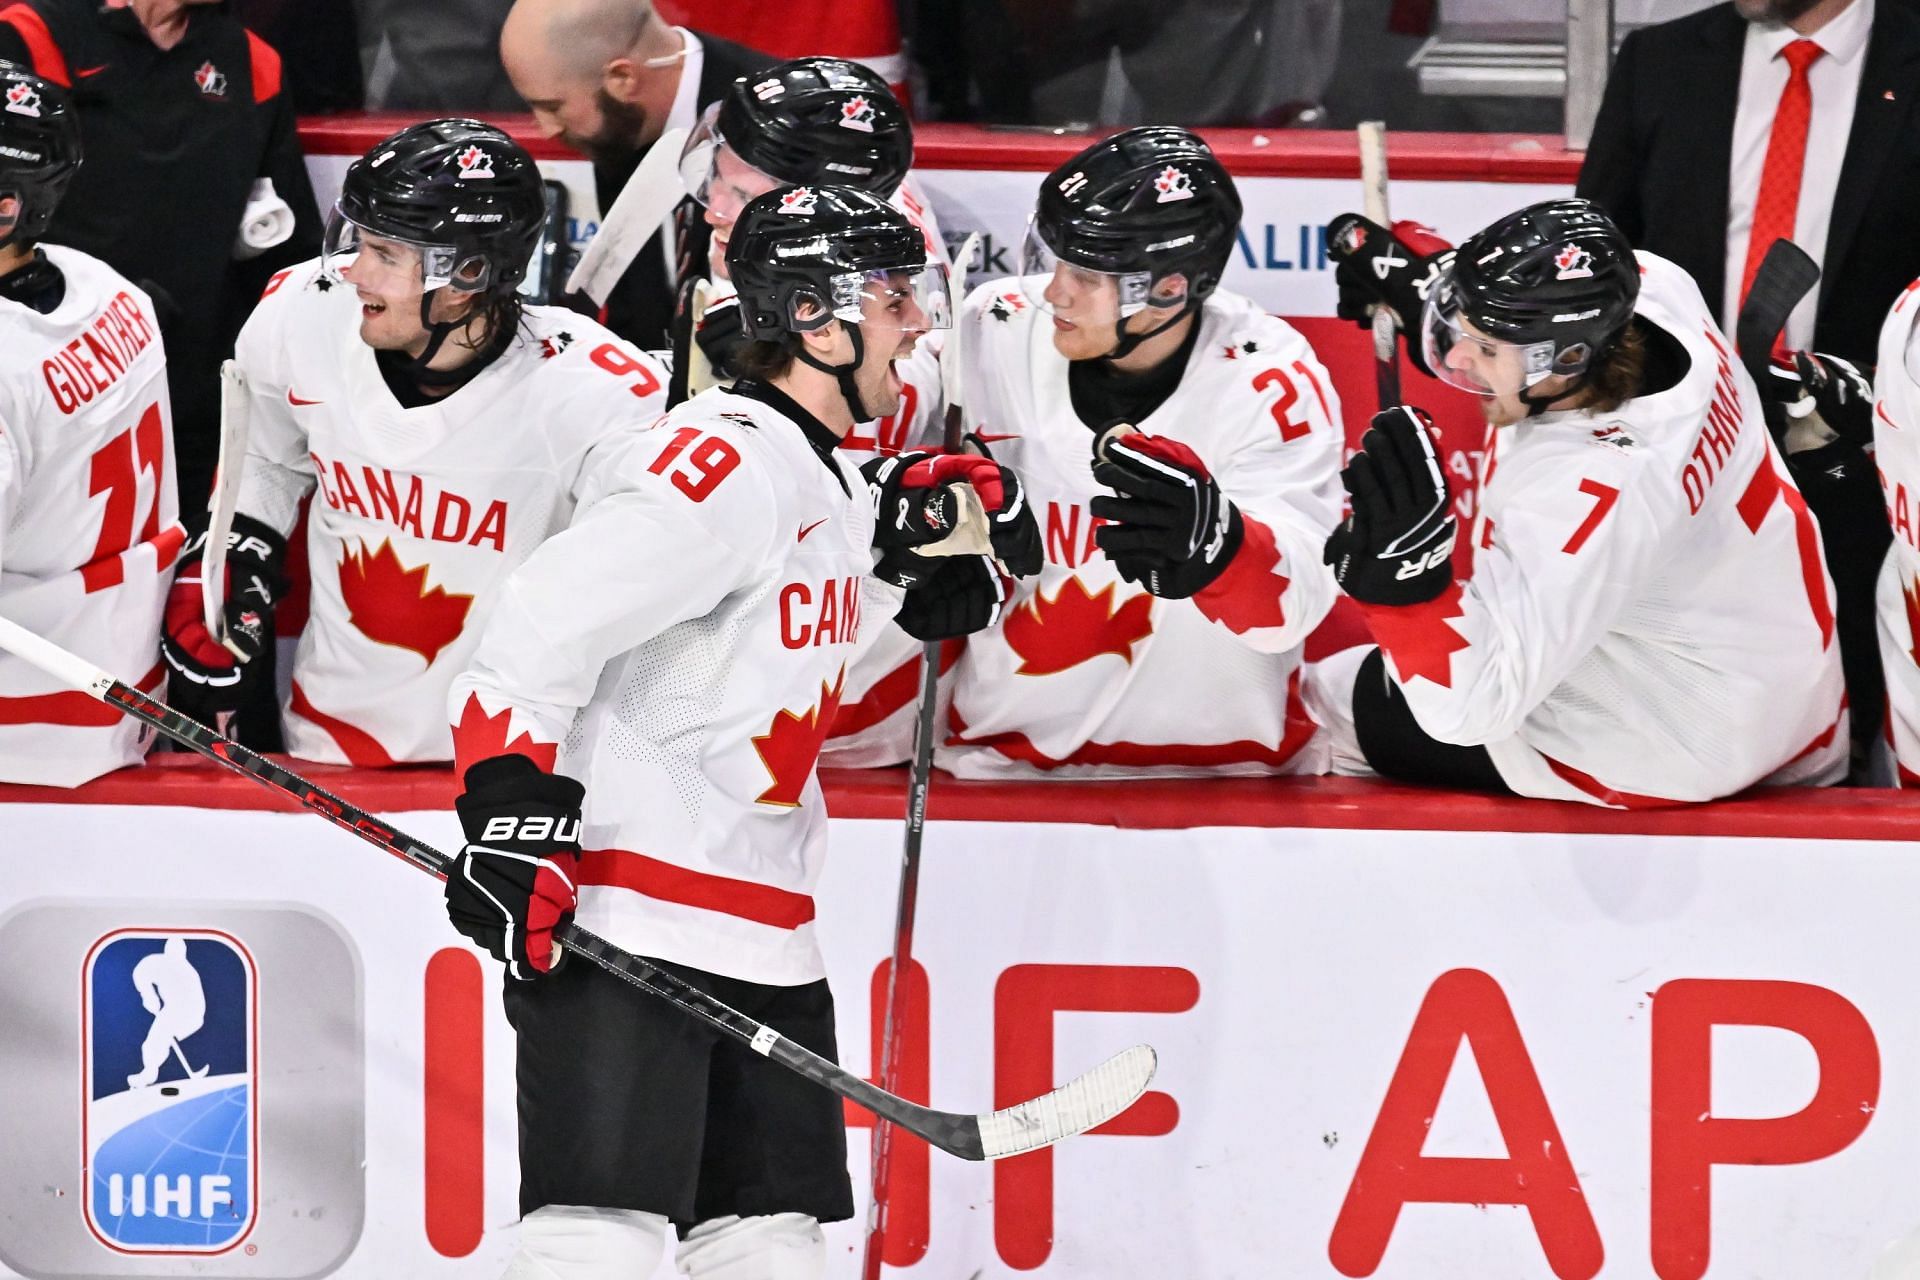 Adam Fantilli #19 of Team Canada celebrates his goal with teammates on the bench during the second period against Team United States in the semifinal round of the 2023 IIHF World Junior Championship at Scotiabank Centre on January 4, 2023, in Halifax, Nova Scotia, Canada. (Photo by Minas Panagiotakis/Getty Images)